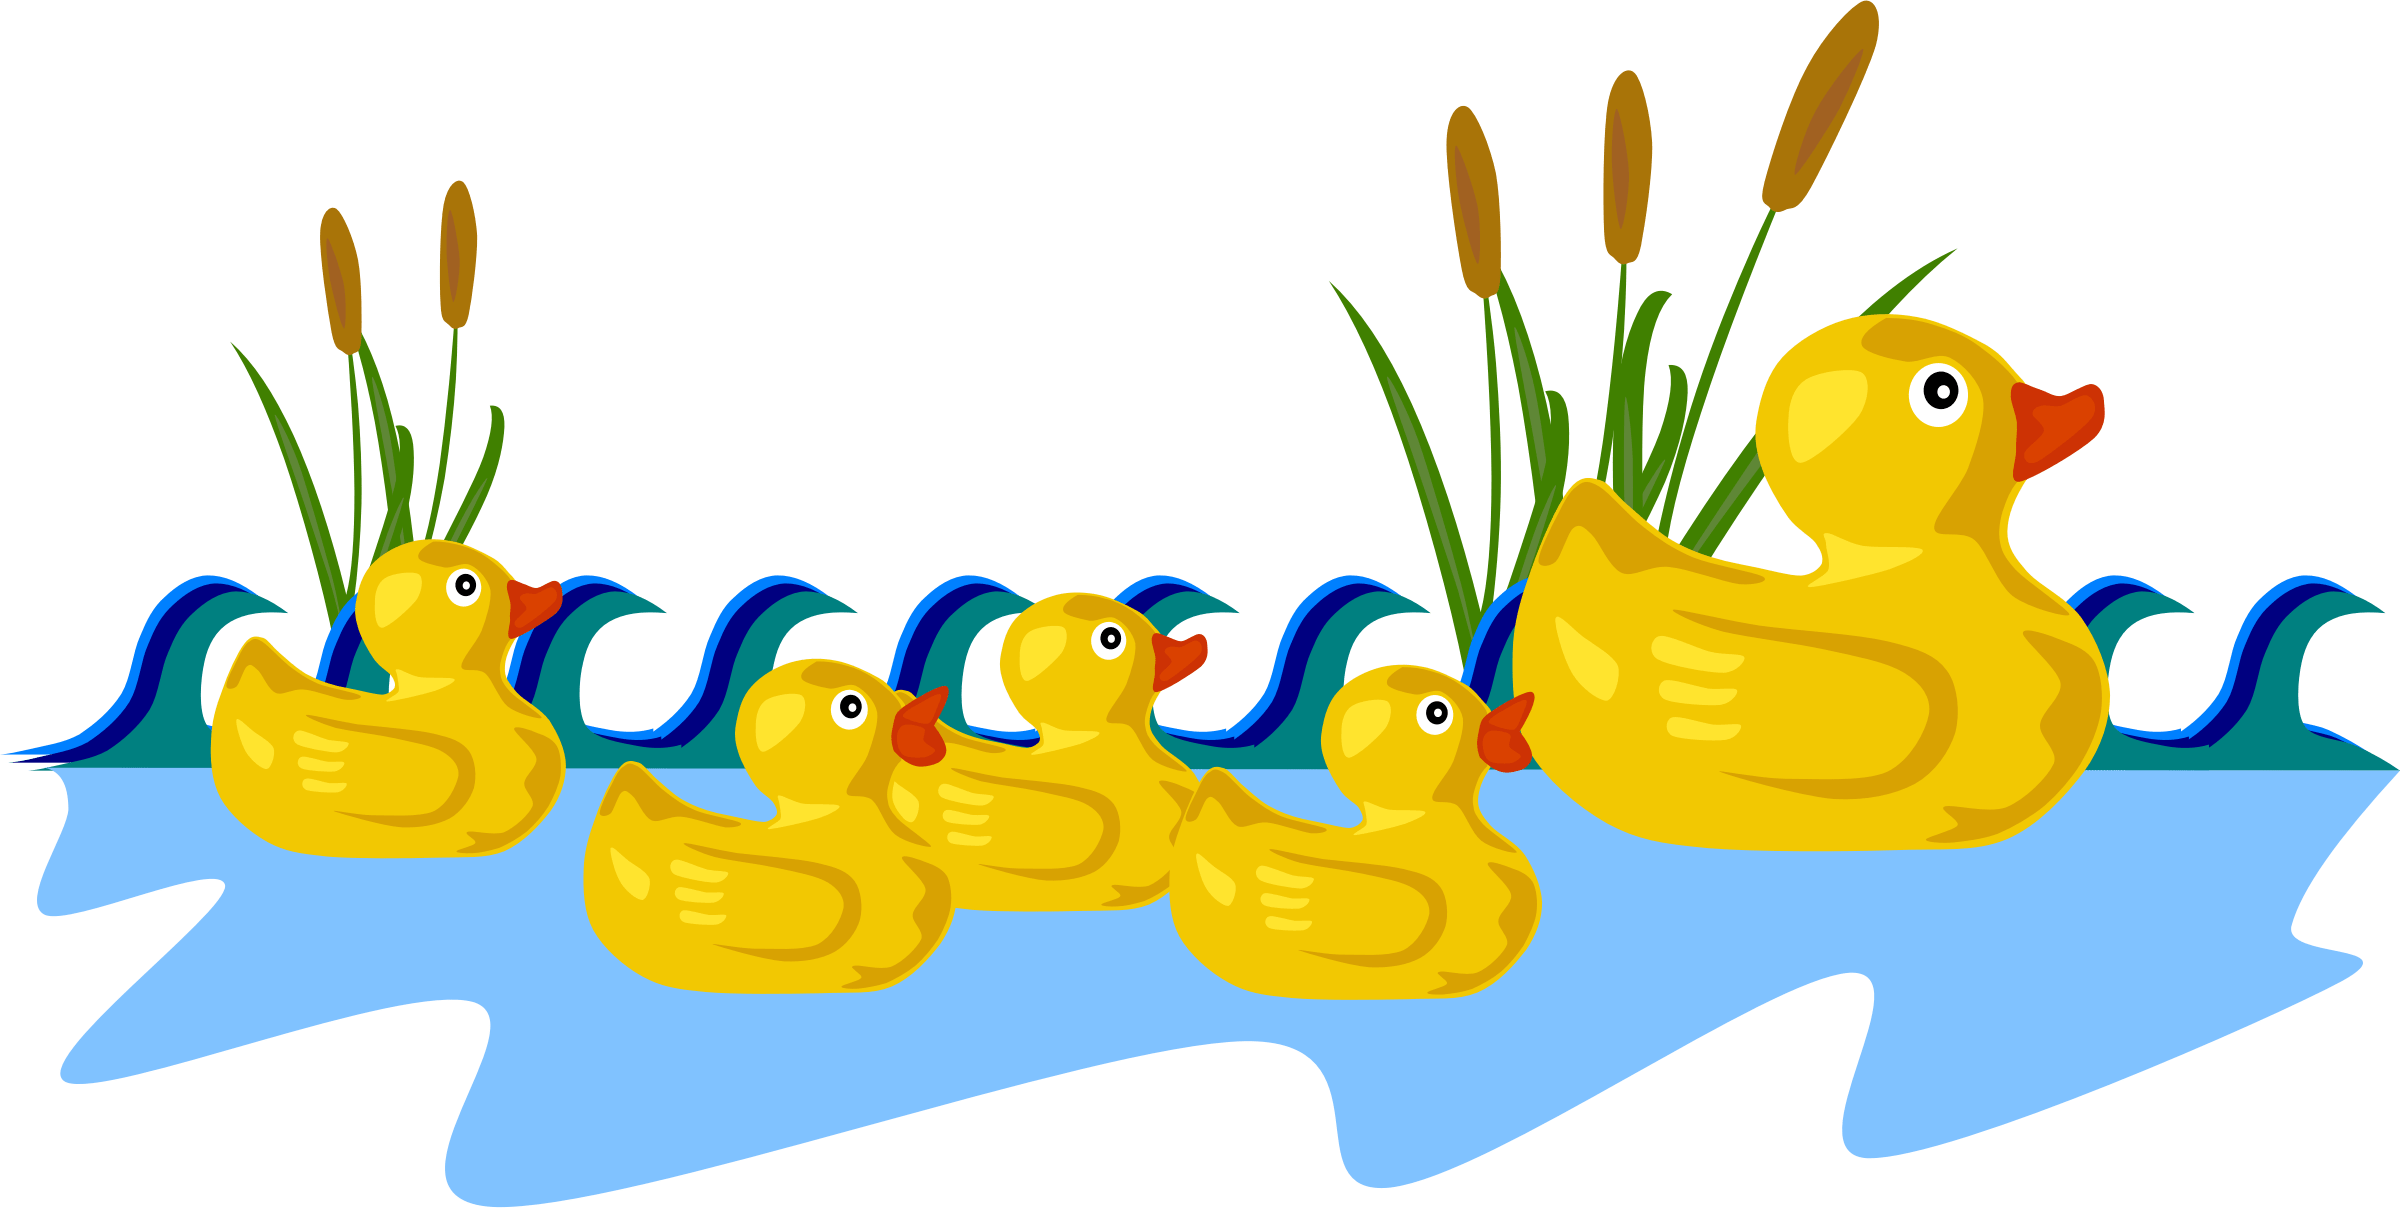 Png ducks in a. Duckling clipart small duck